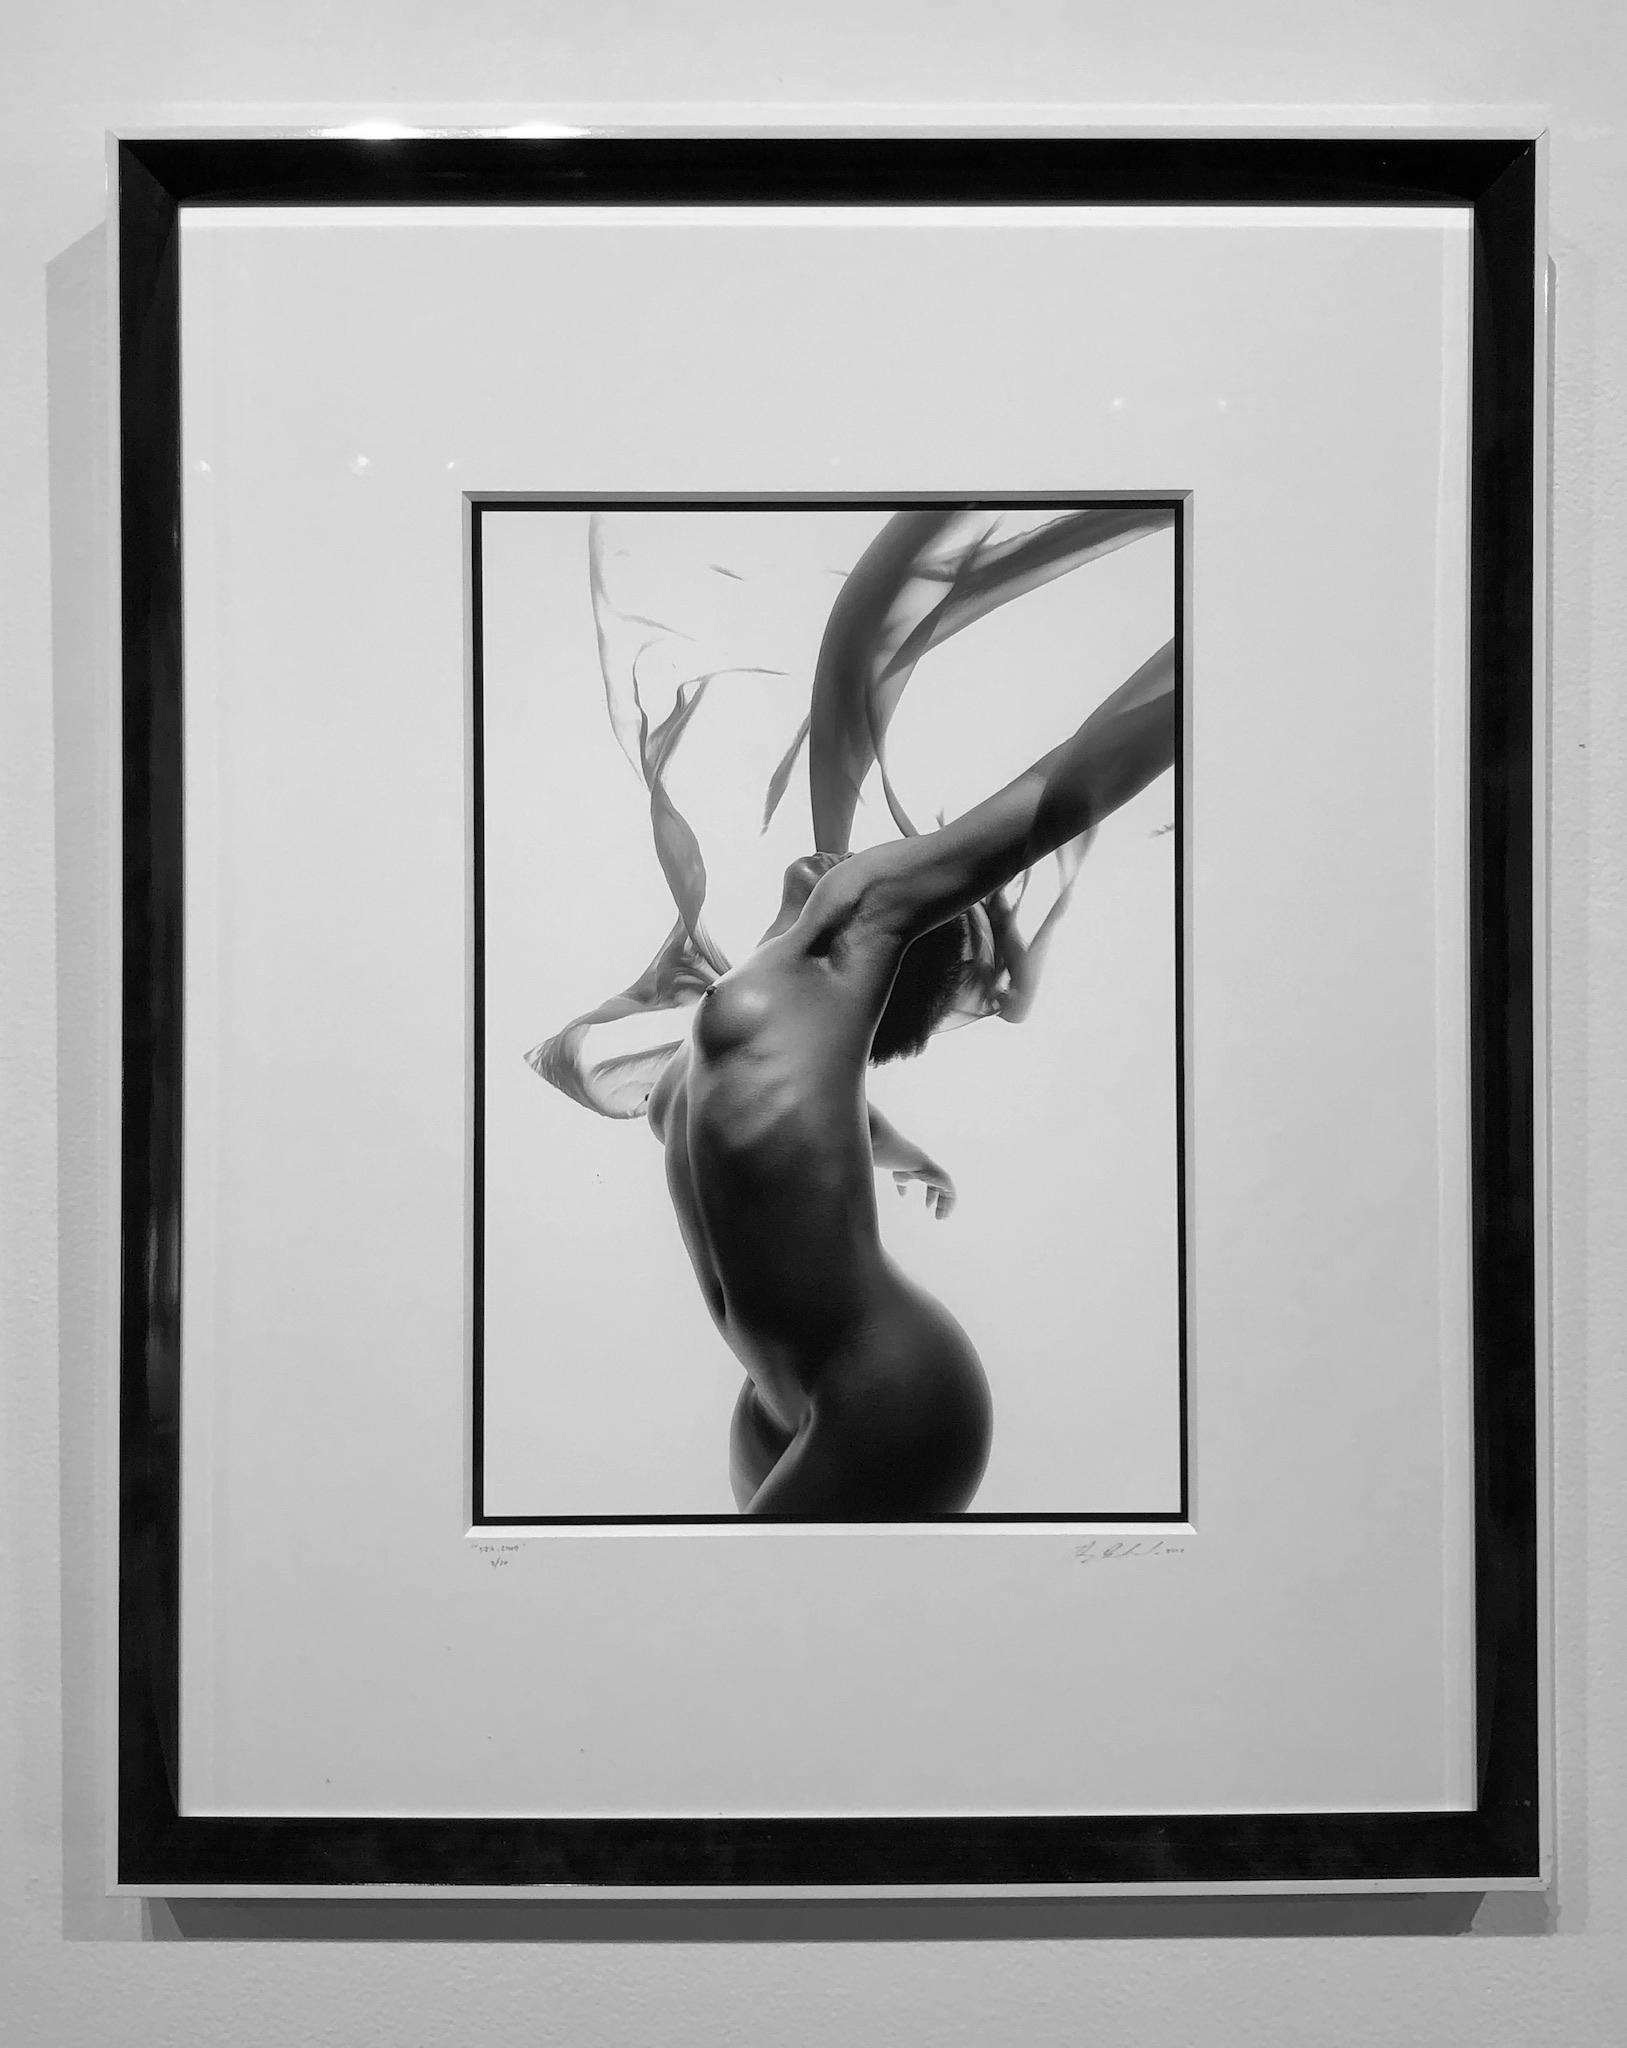 SJ1, Nude Female with Flowing Sheer Veil, Black and White Photo, Matted, Framed - Photograph by Doug Birkenheuer